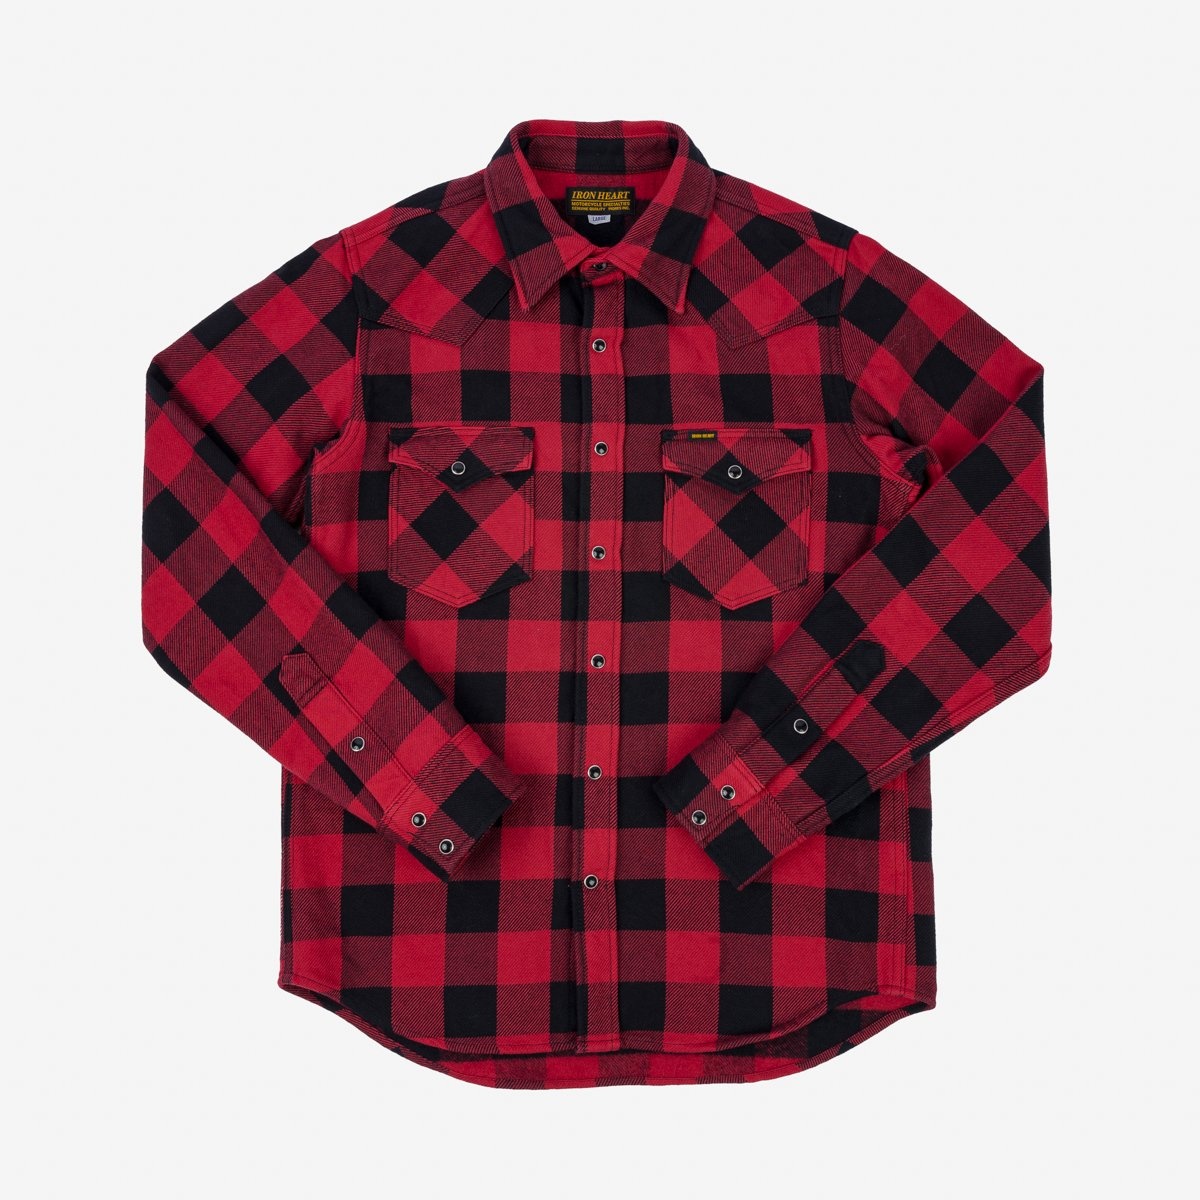 IHSH-232-RED Ultra Heavy Flannel Buffalo Check Western Shirt - Red/Black - 1